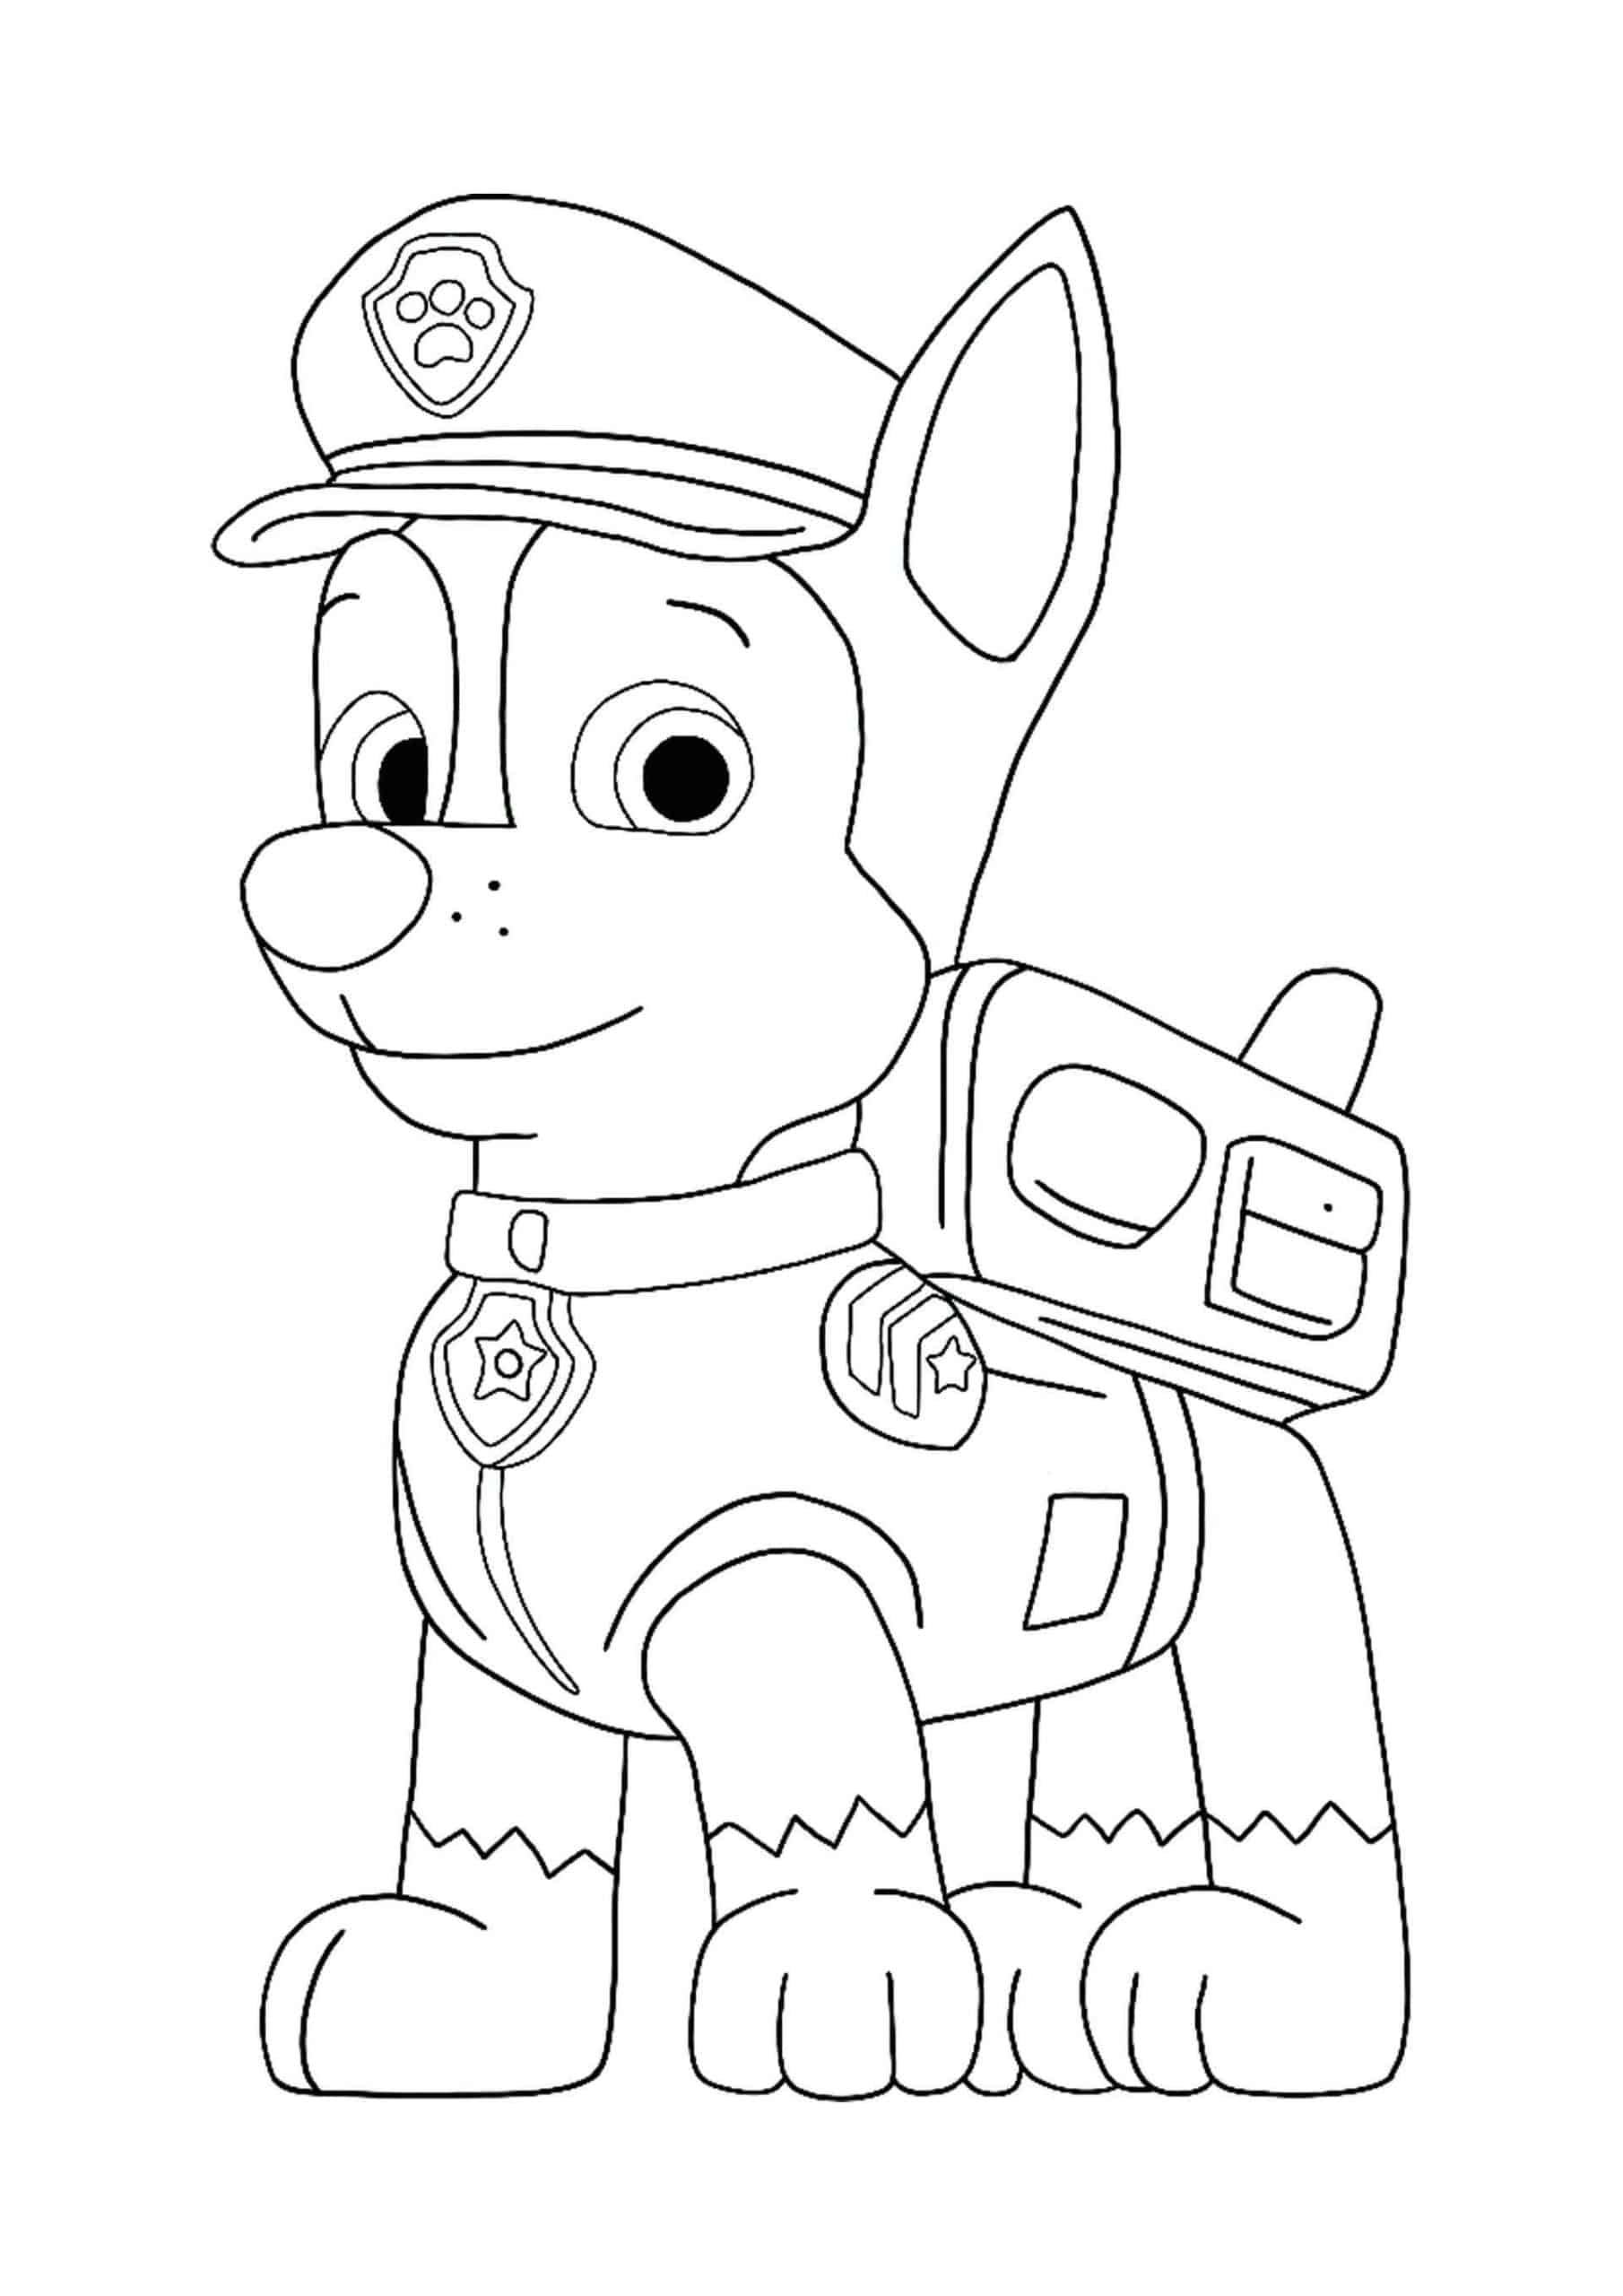 Printable Chase Paw Patrol Coloring Pages - Chase Paw Patrol Coloring Pages to print